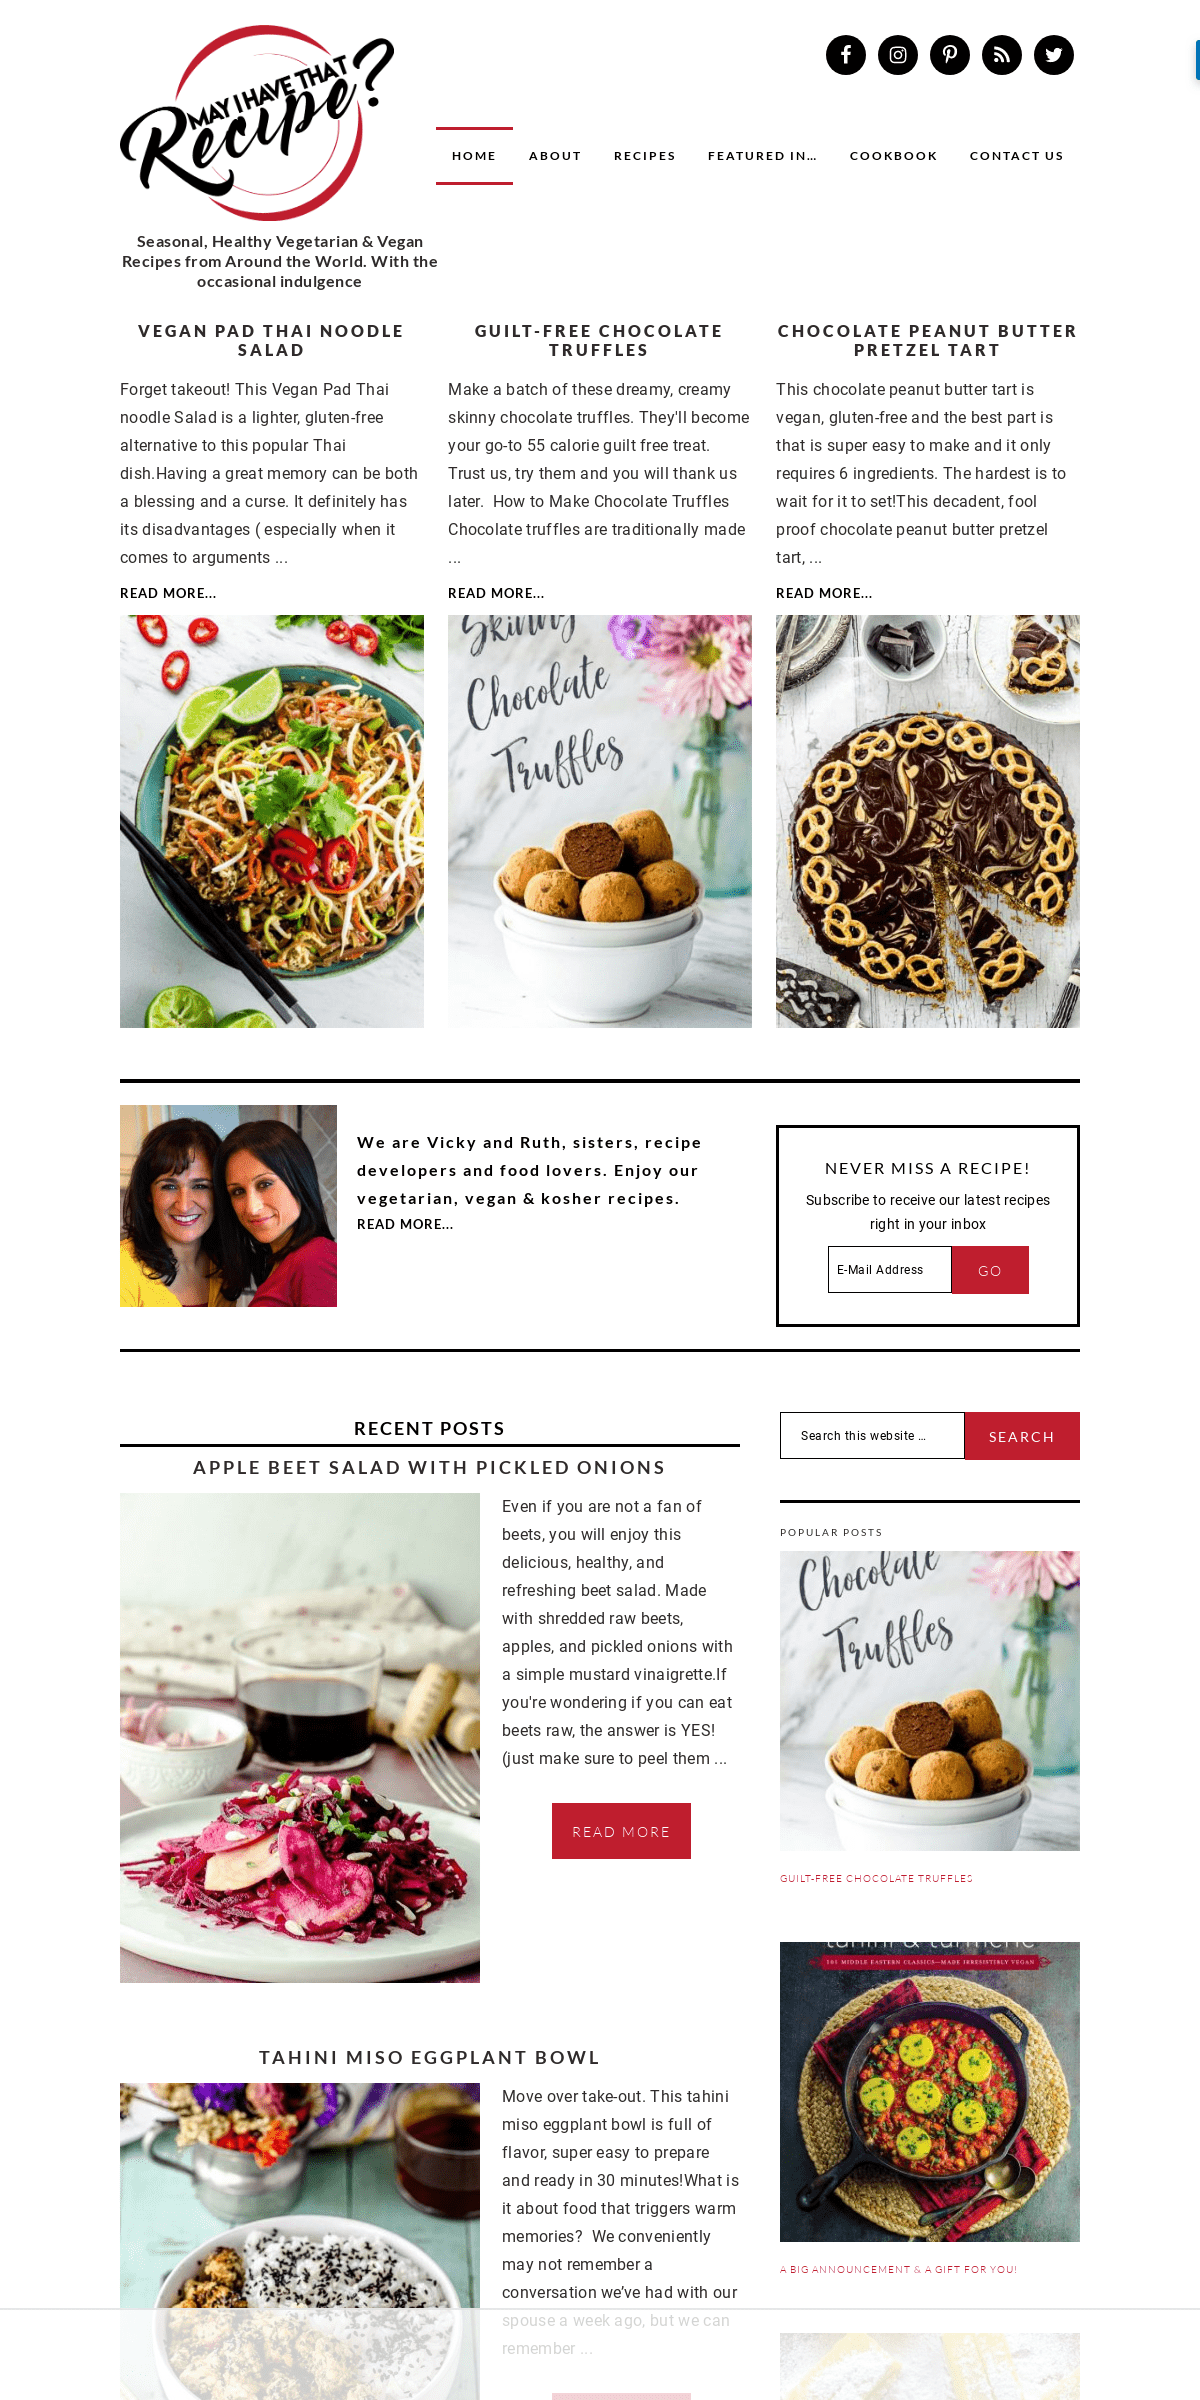 A complete backup of mayihavethatrecipe.com